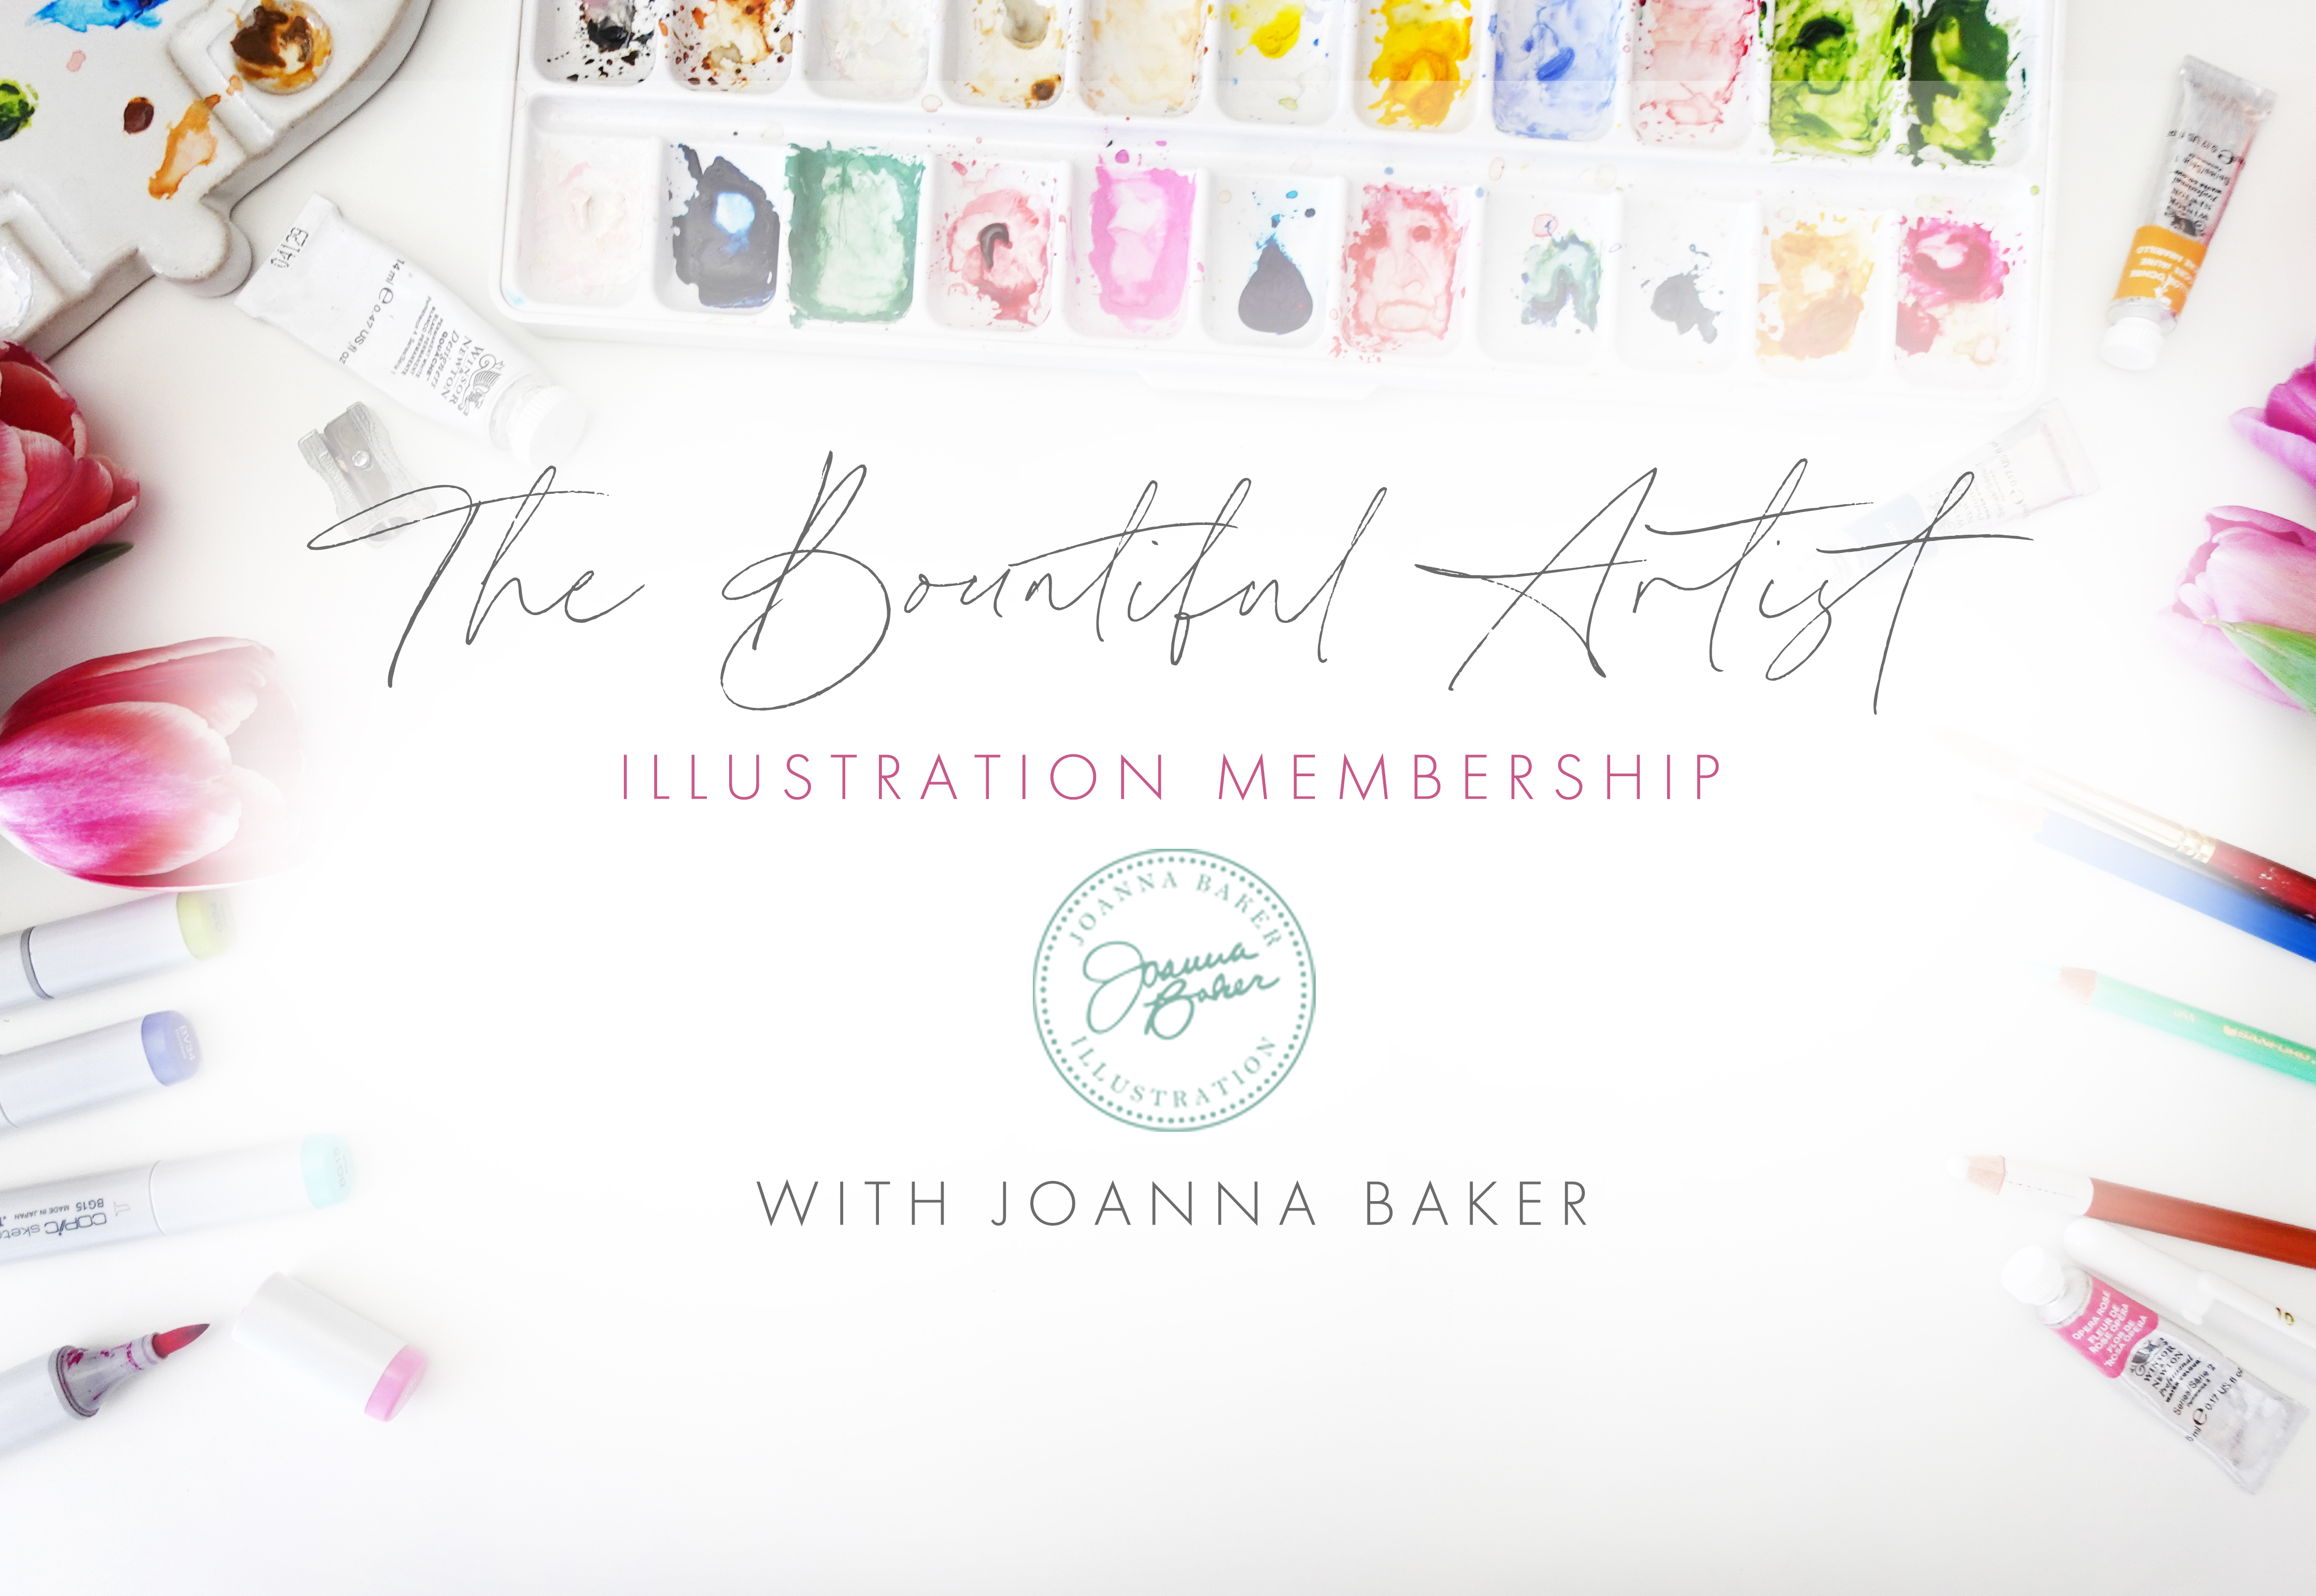 Join The Bountiful Artist Monthly Illustration Membership with Joanna Baker